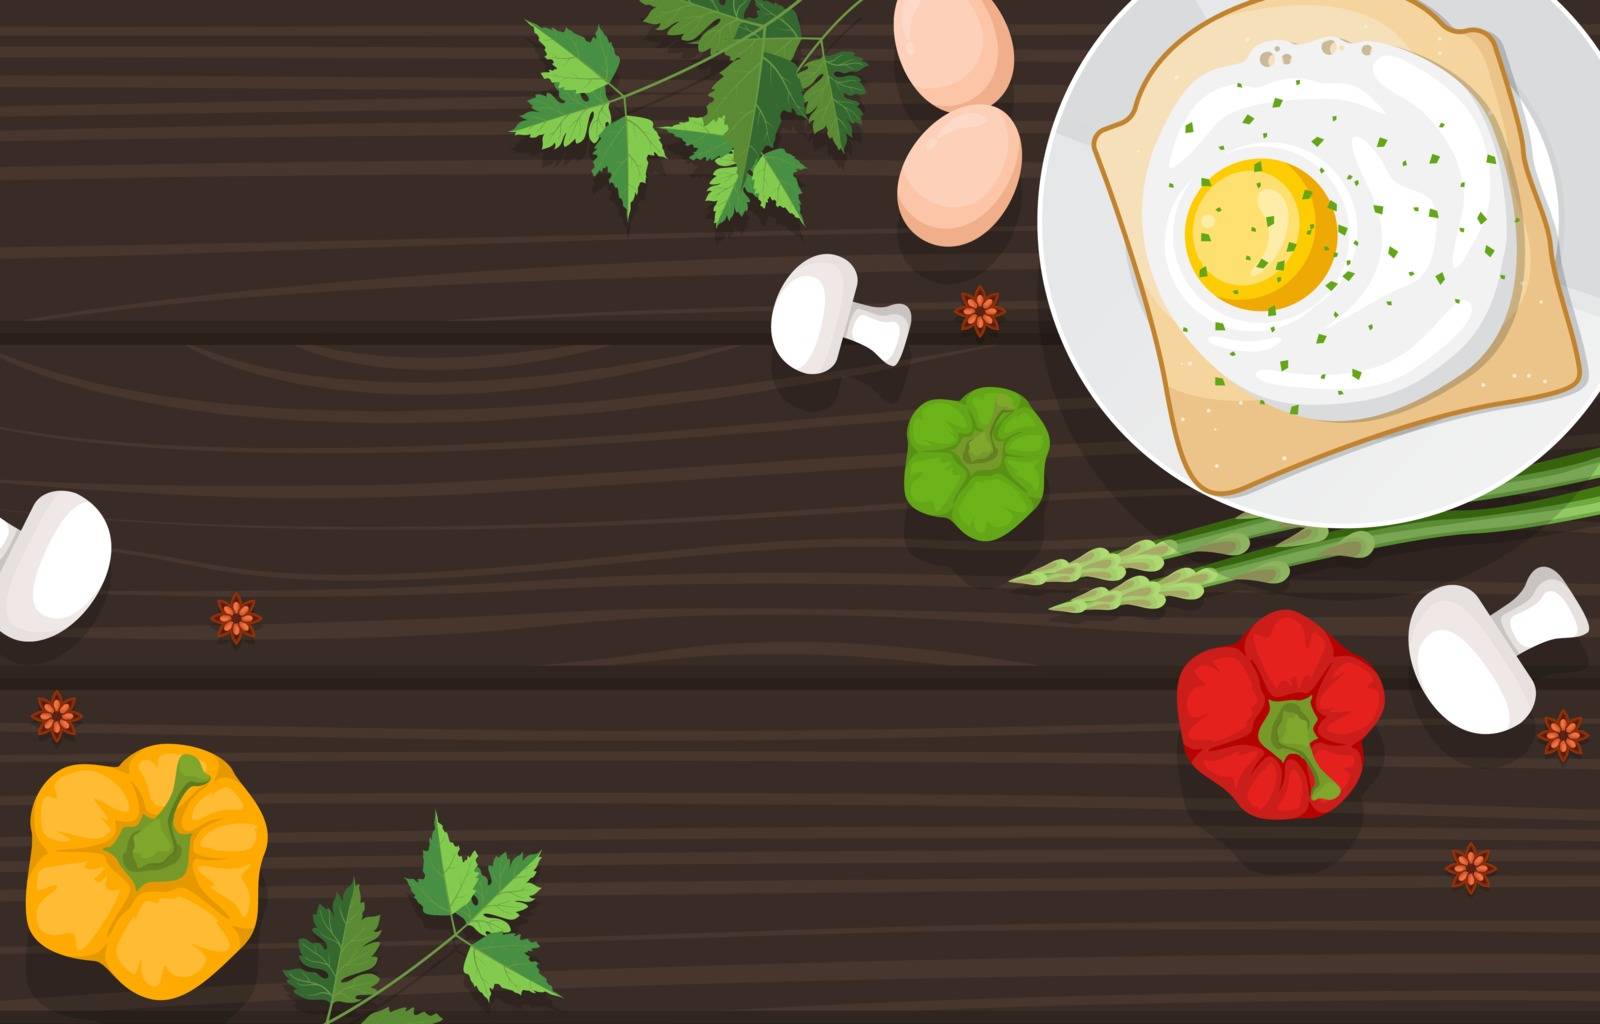 Eggs Bread Vegetables on Cooking Wooden Table Kitchen Backdrop Illustration by jongcreative